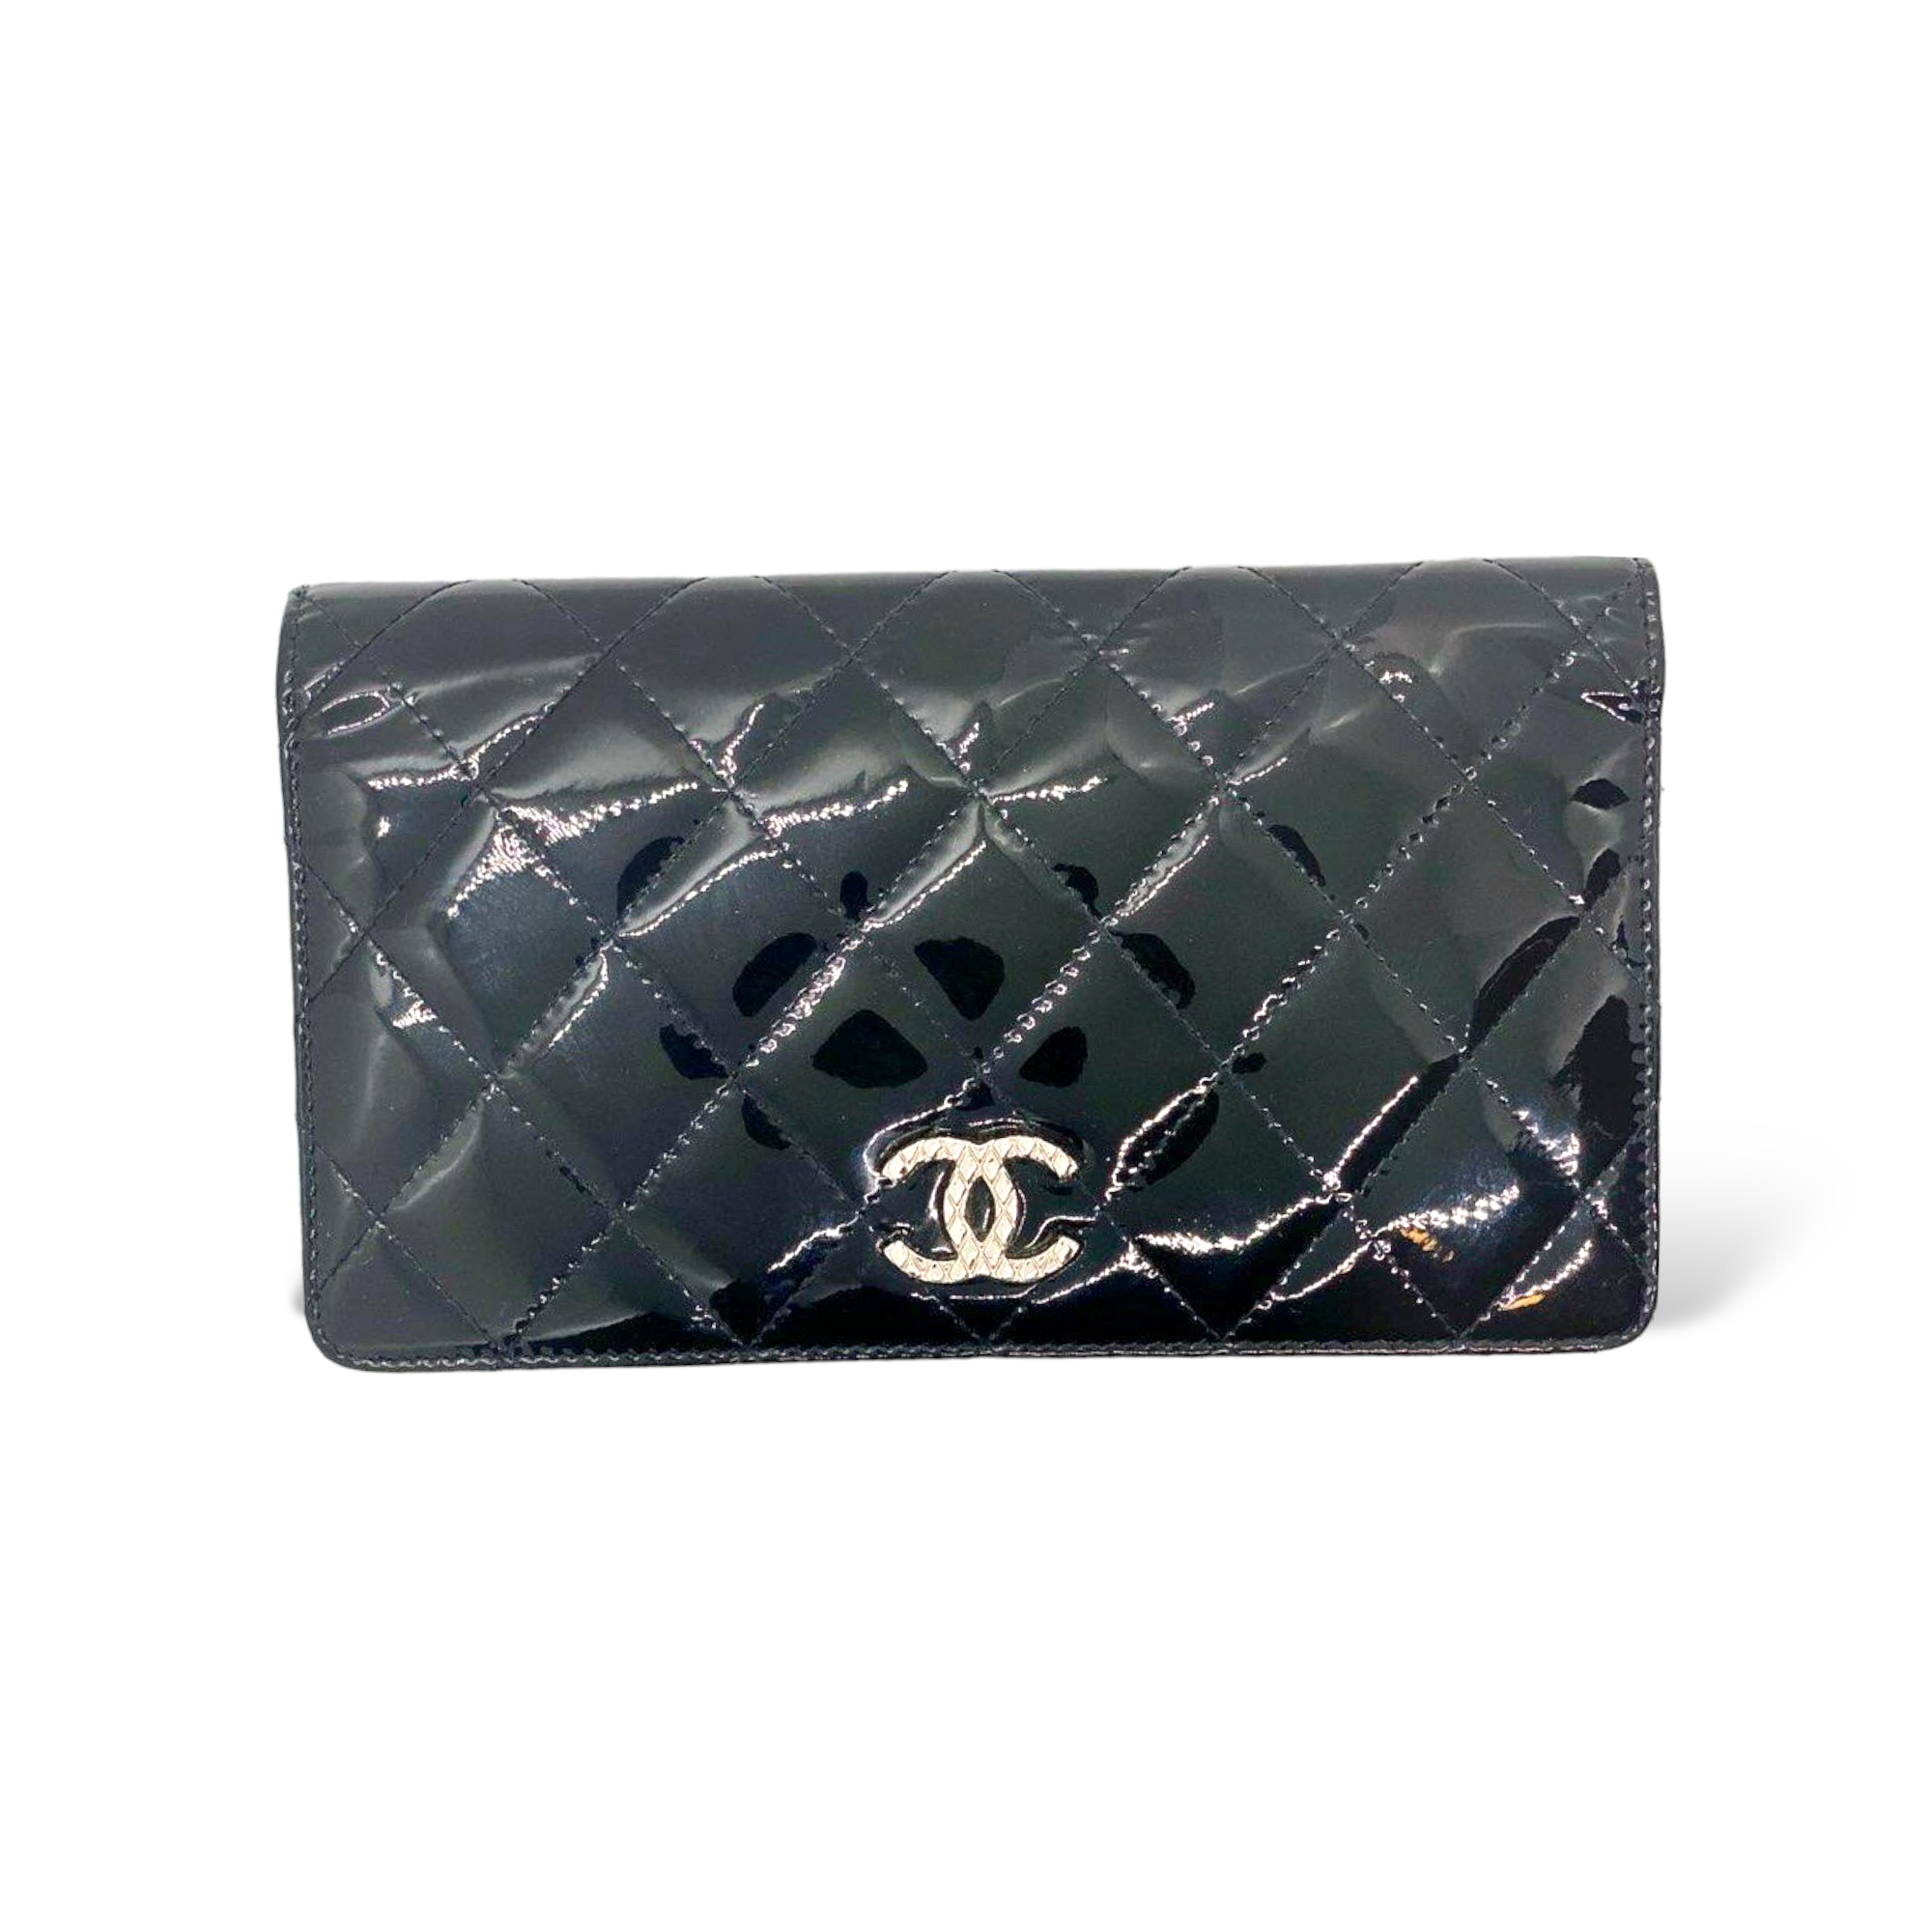 Chanel Pink Quilted Leather L Yen Continental Wallet Chanel